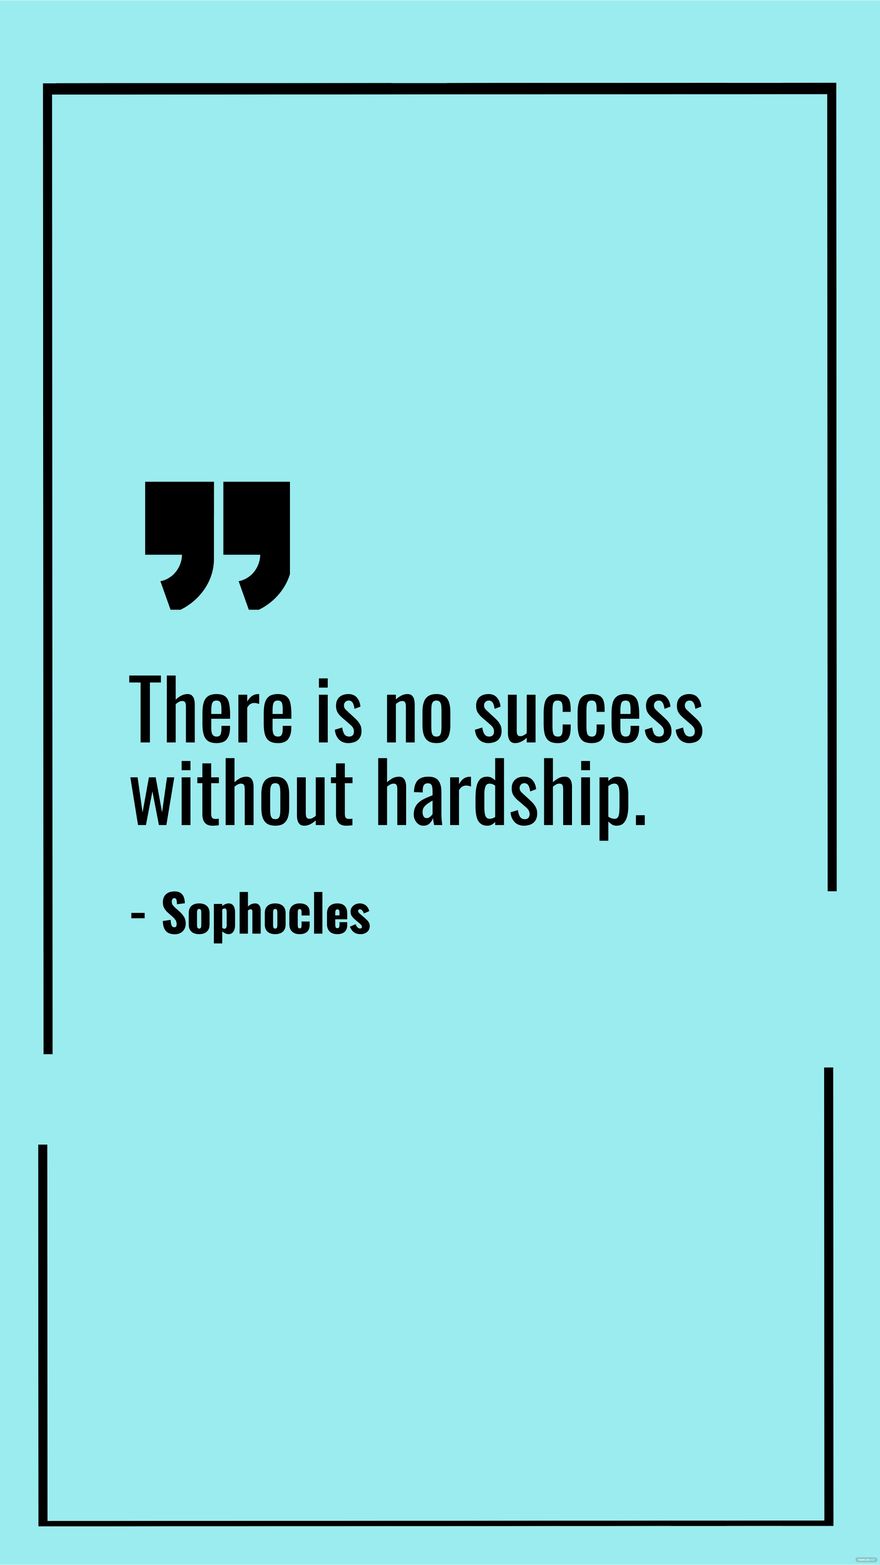 Free Sophocles - There is no success without hardship.